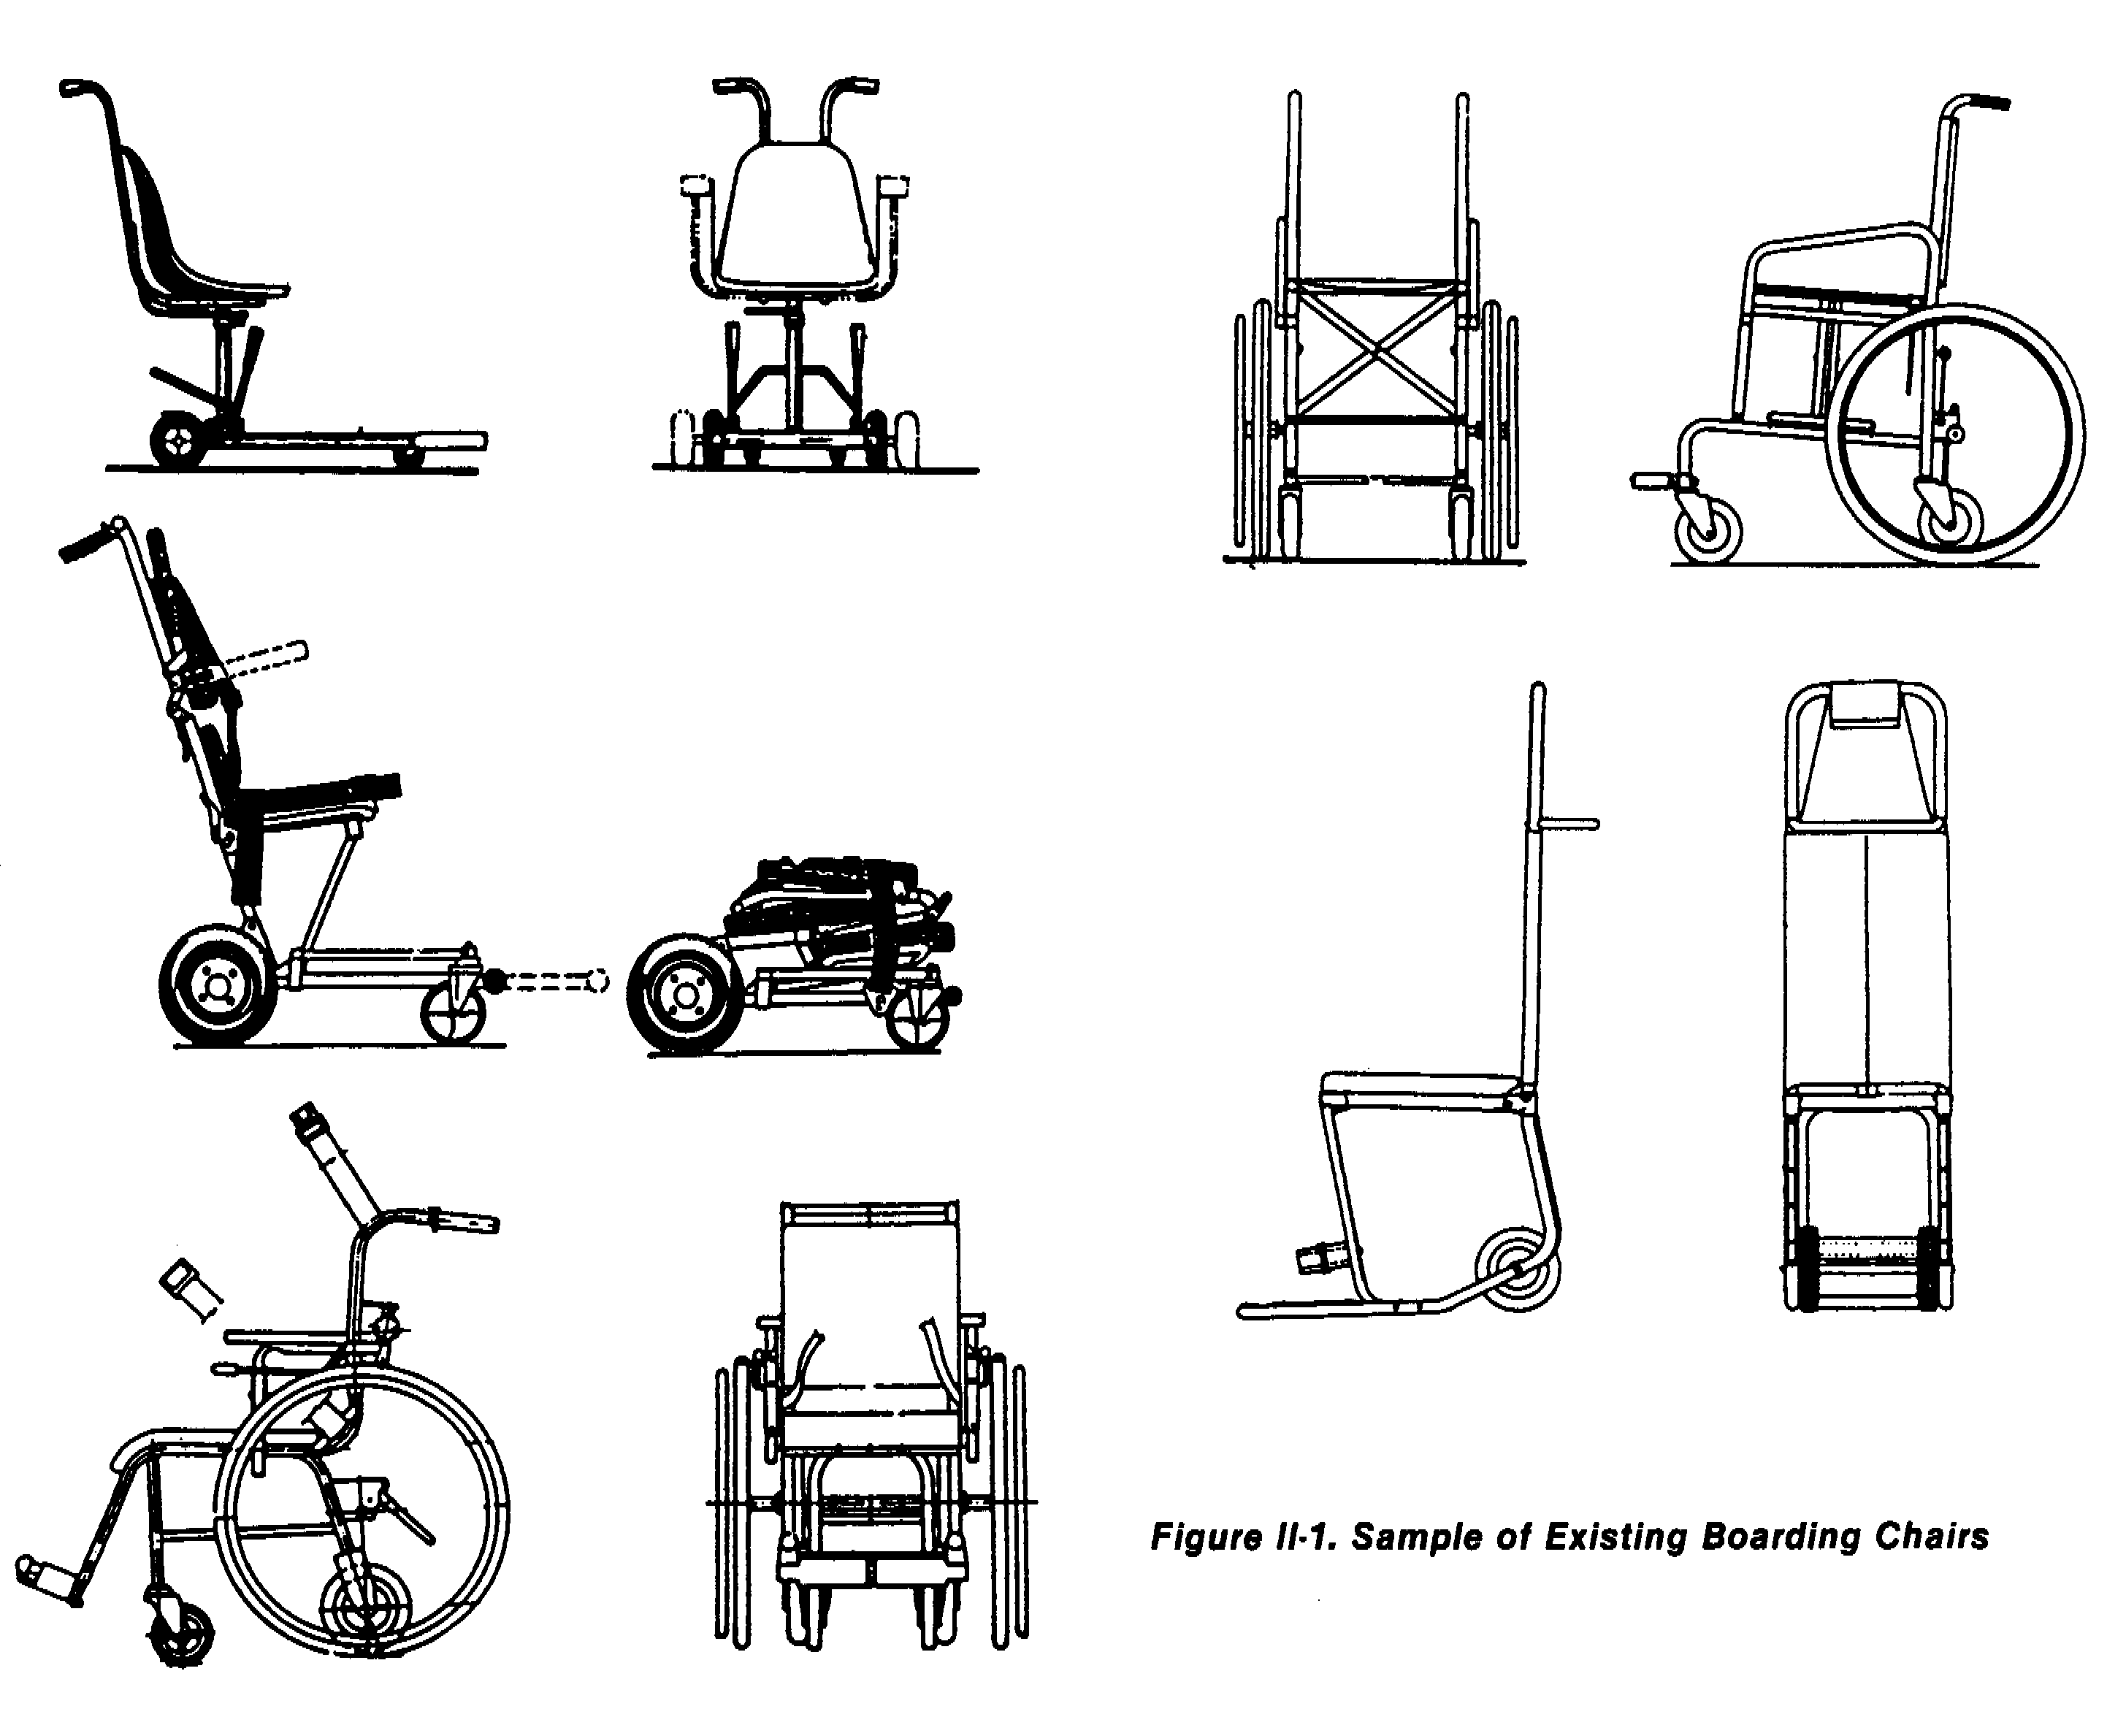 The figure is composed of ten graphics identifying five different configurations of aircraft boarding chairs.  They show a front and side view of five styles of available boarding chairs.